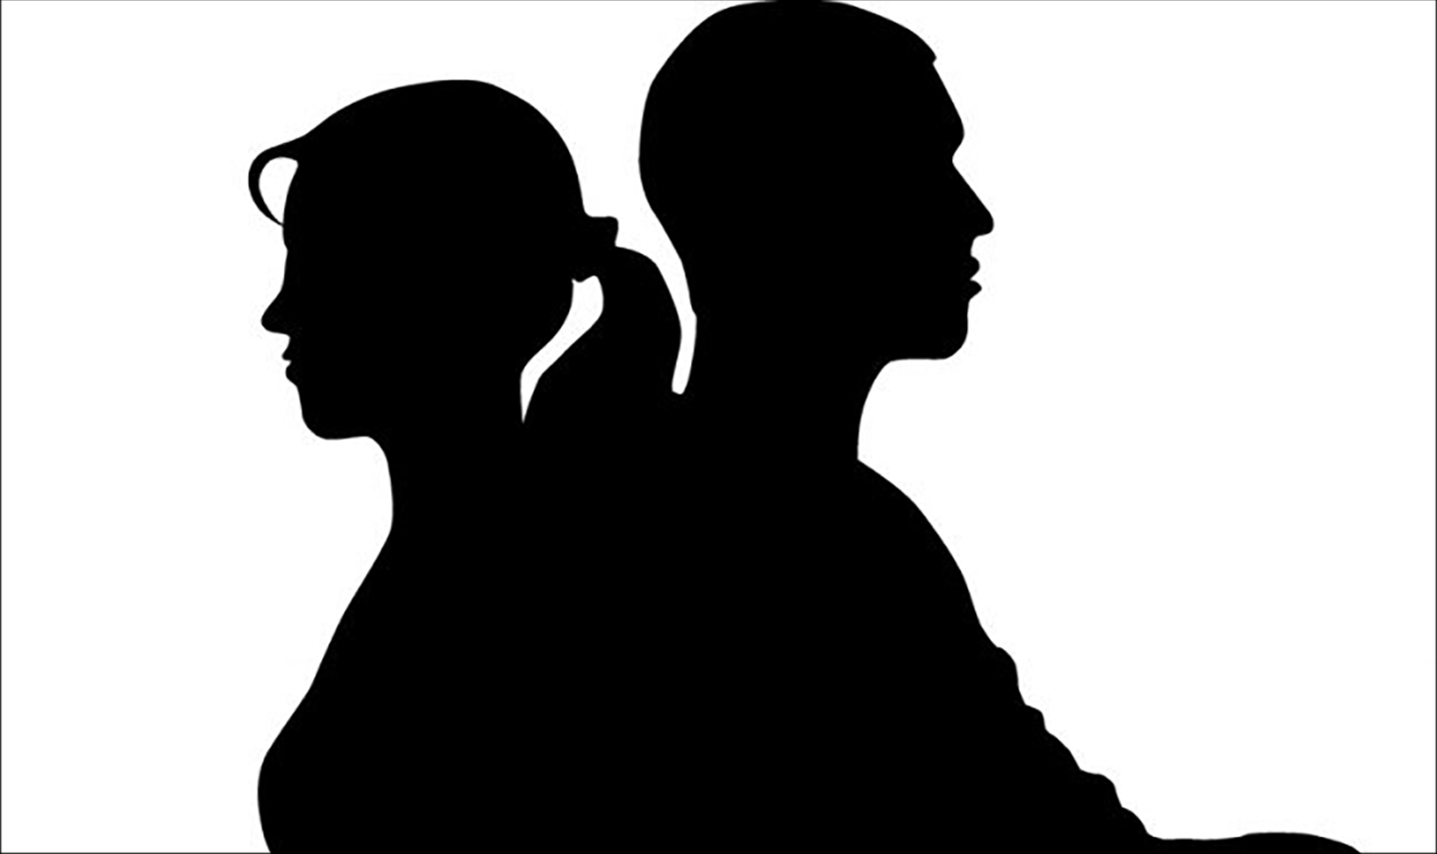 Silhouette of two people seated back to back